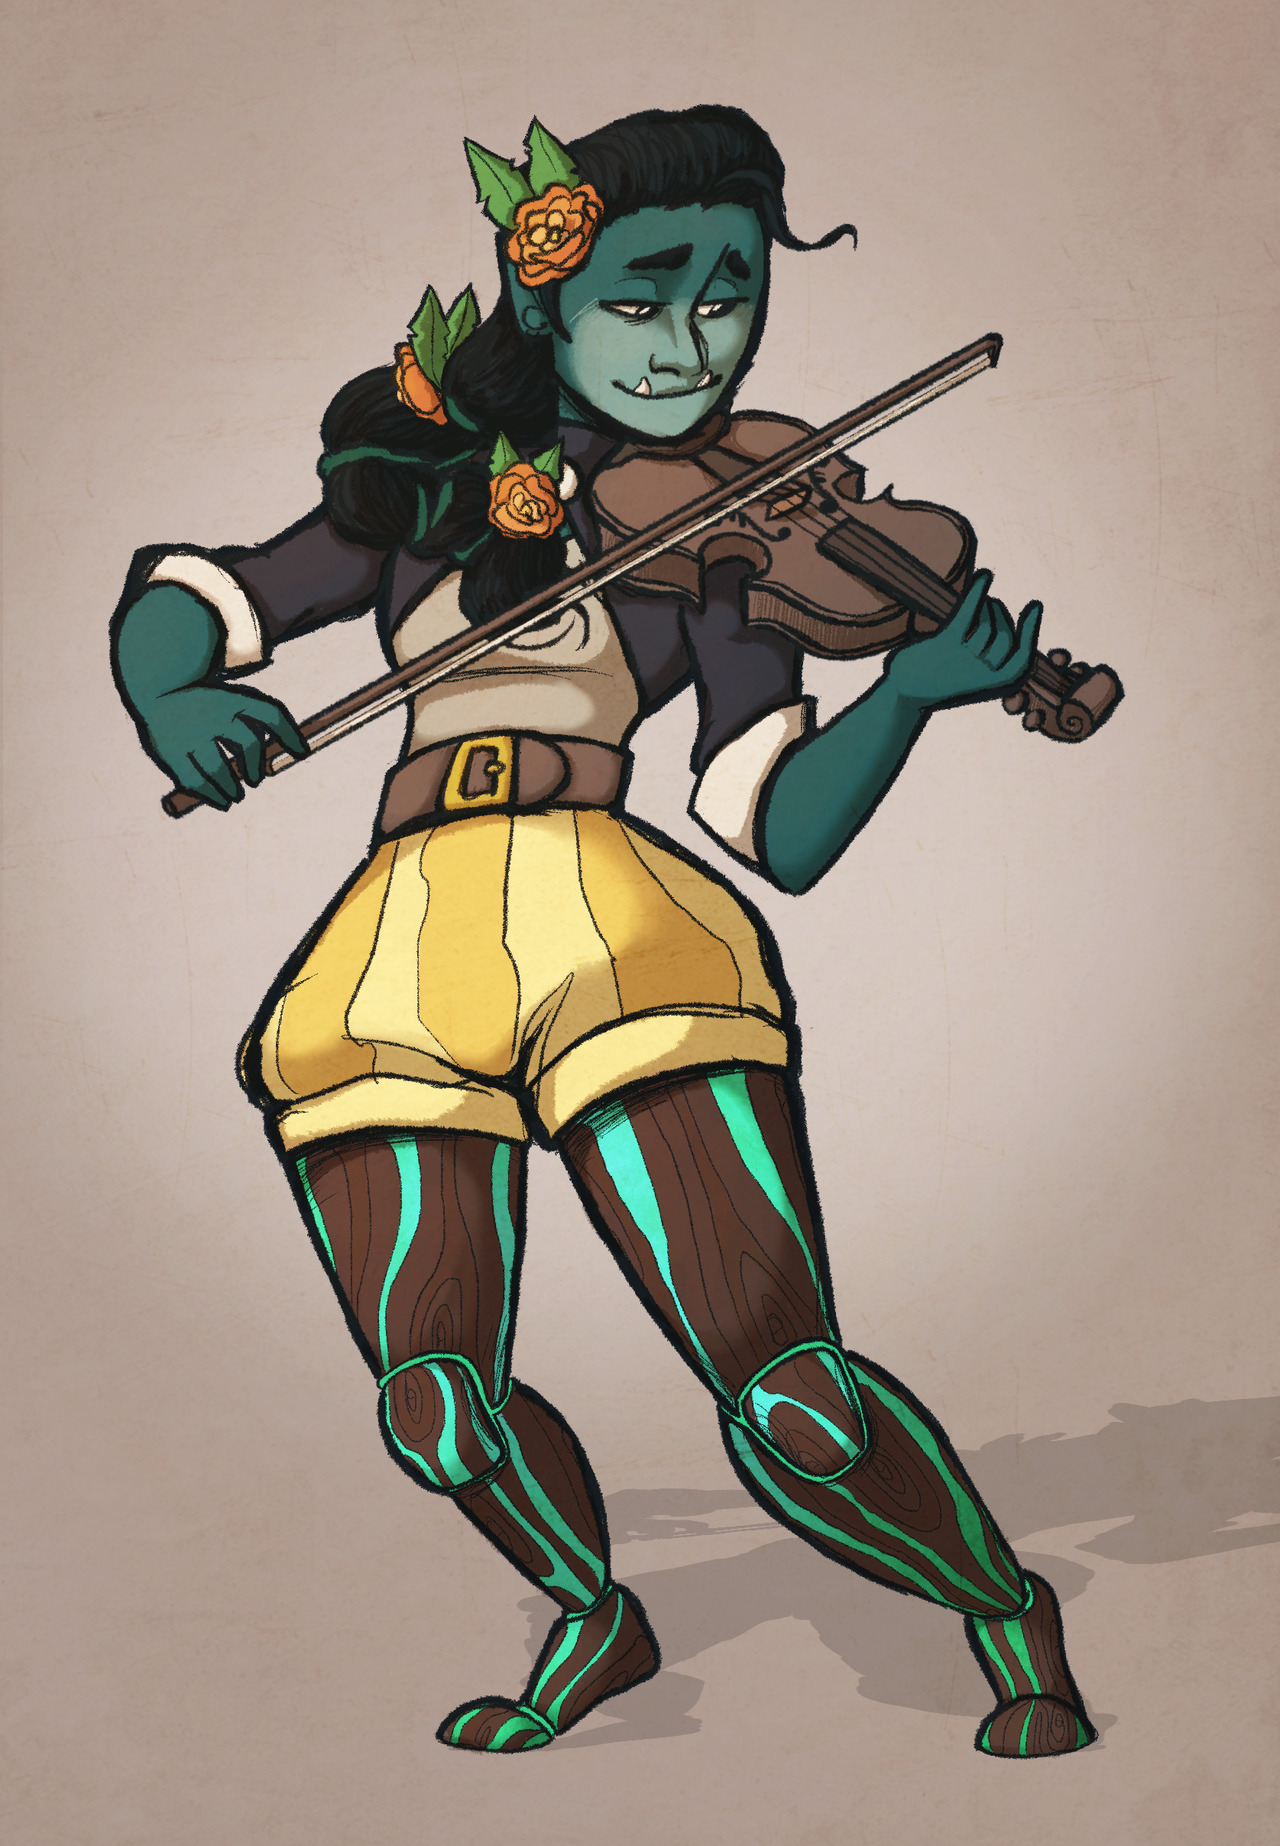 A character prompt for a friendly half-orc bard with prosthetic limbs.